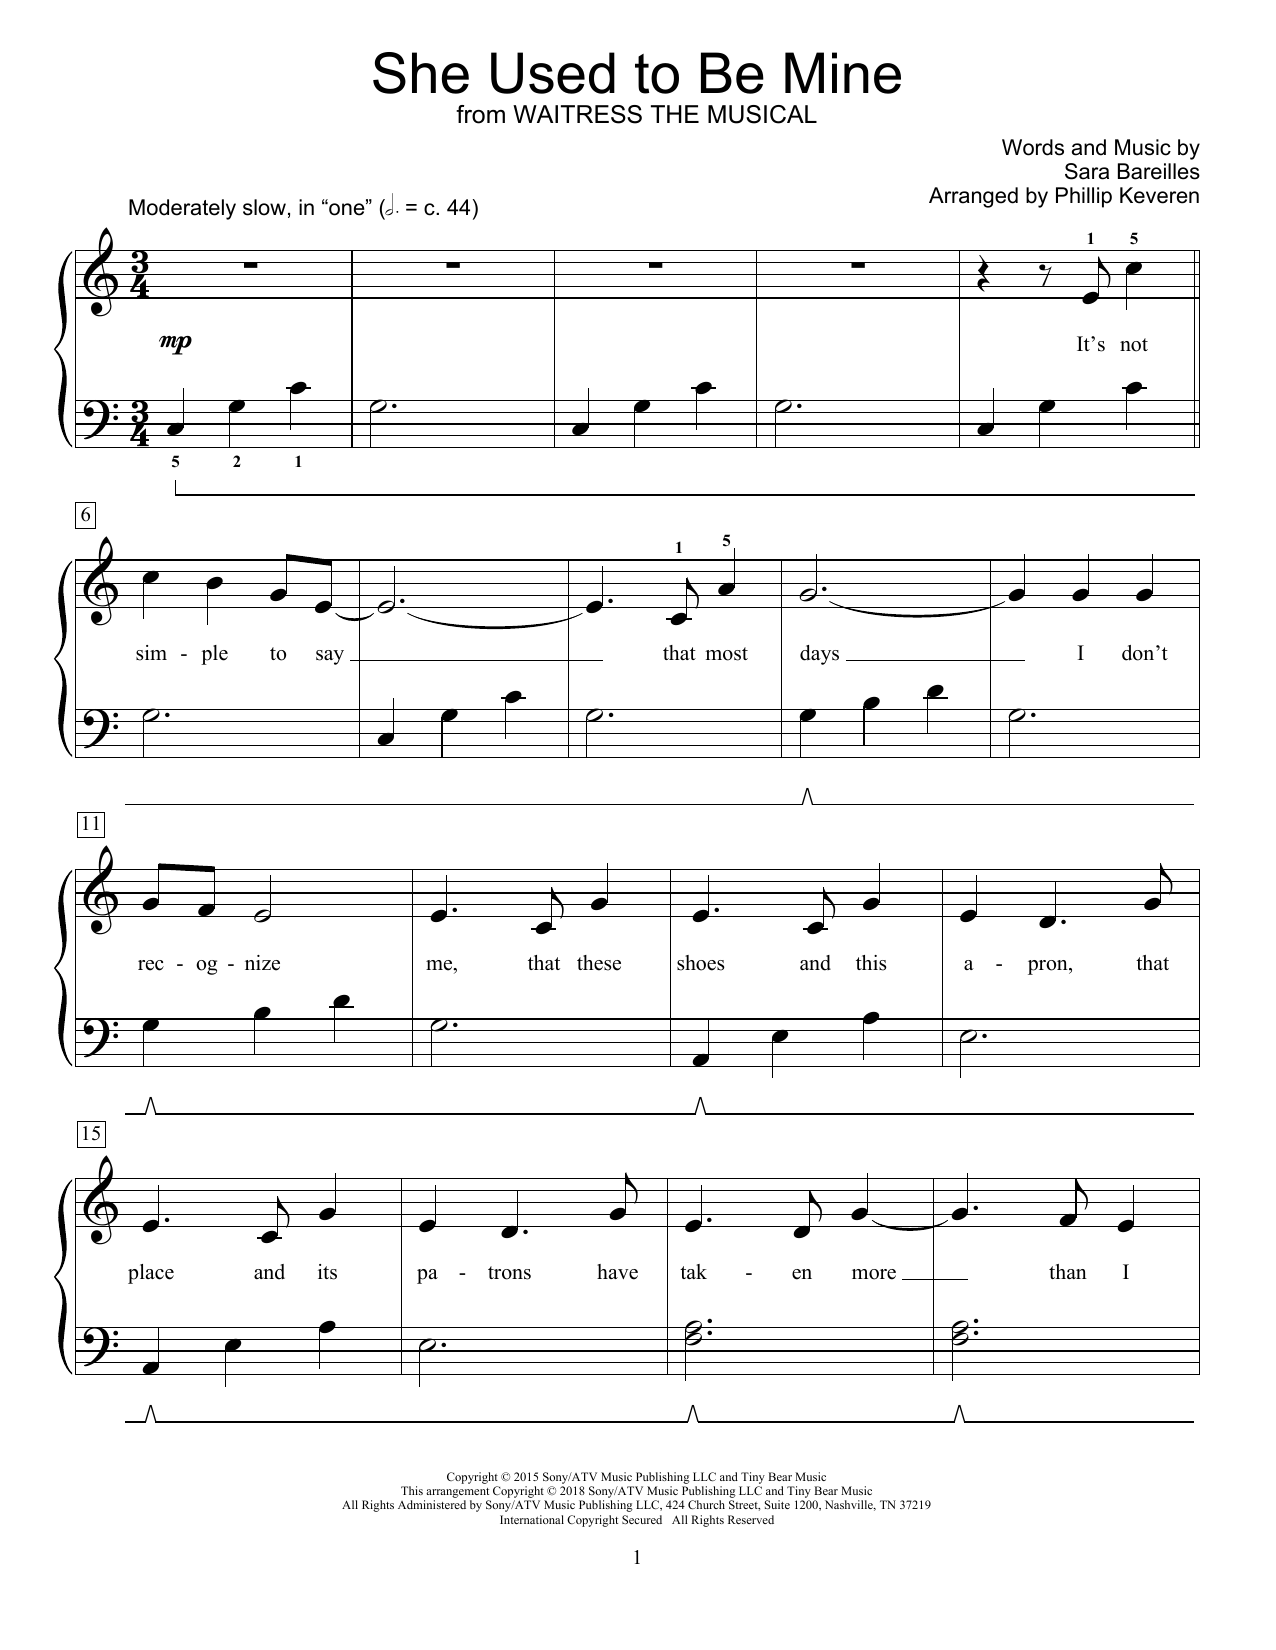 Download Sara Bareilles She Used To Be Mine (from Waitress) (ar Sheet Music